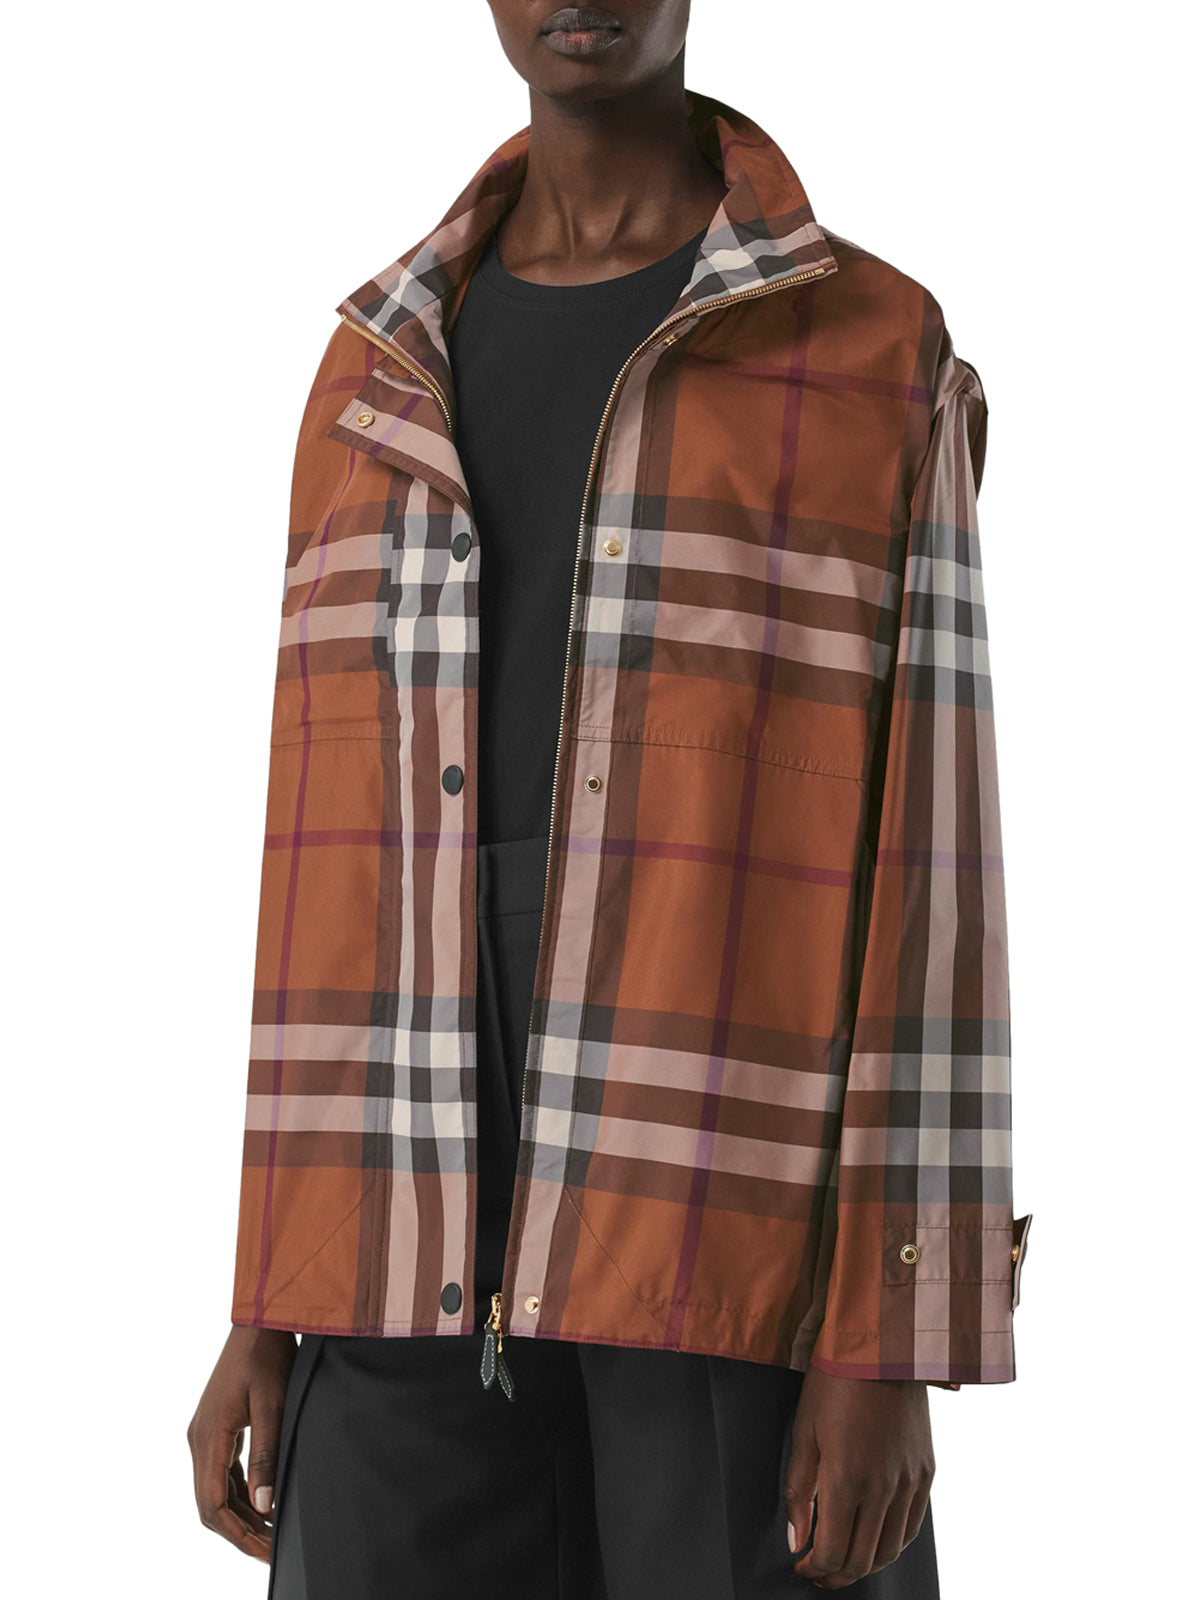 Hooded reconstructed jacket with tartan motif – Suit Negozi Row